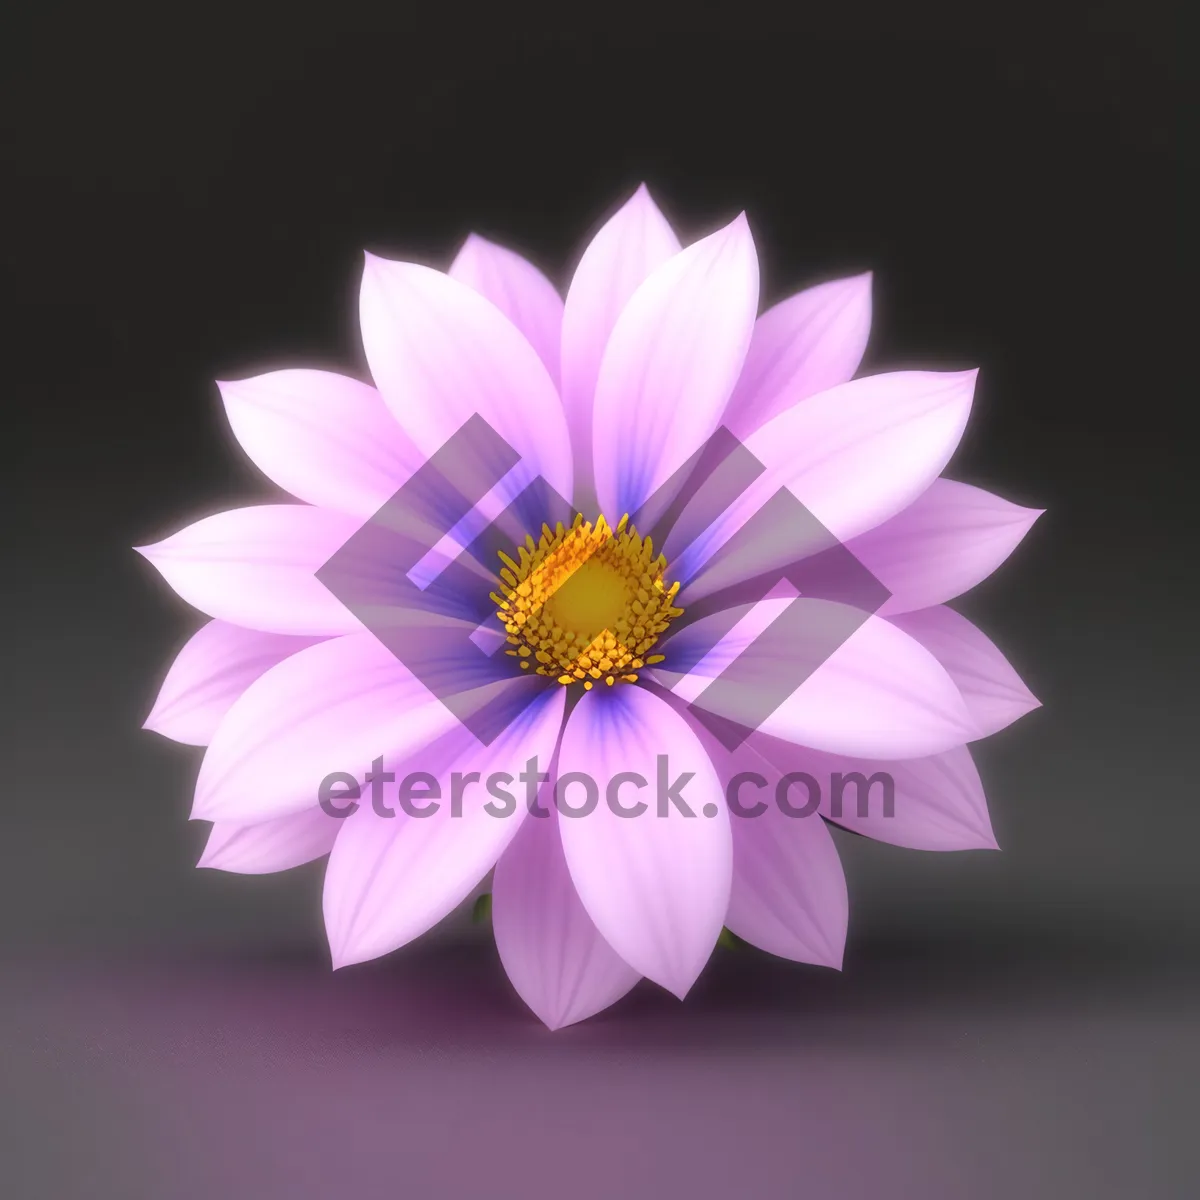 Picture of Pink Daisy Blossom - Vibrant Floral Petal in Bloom